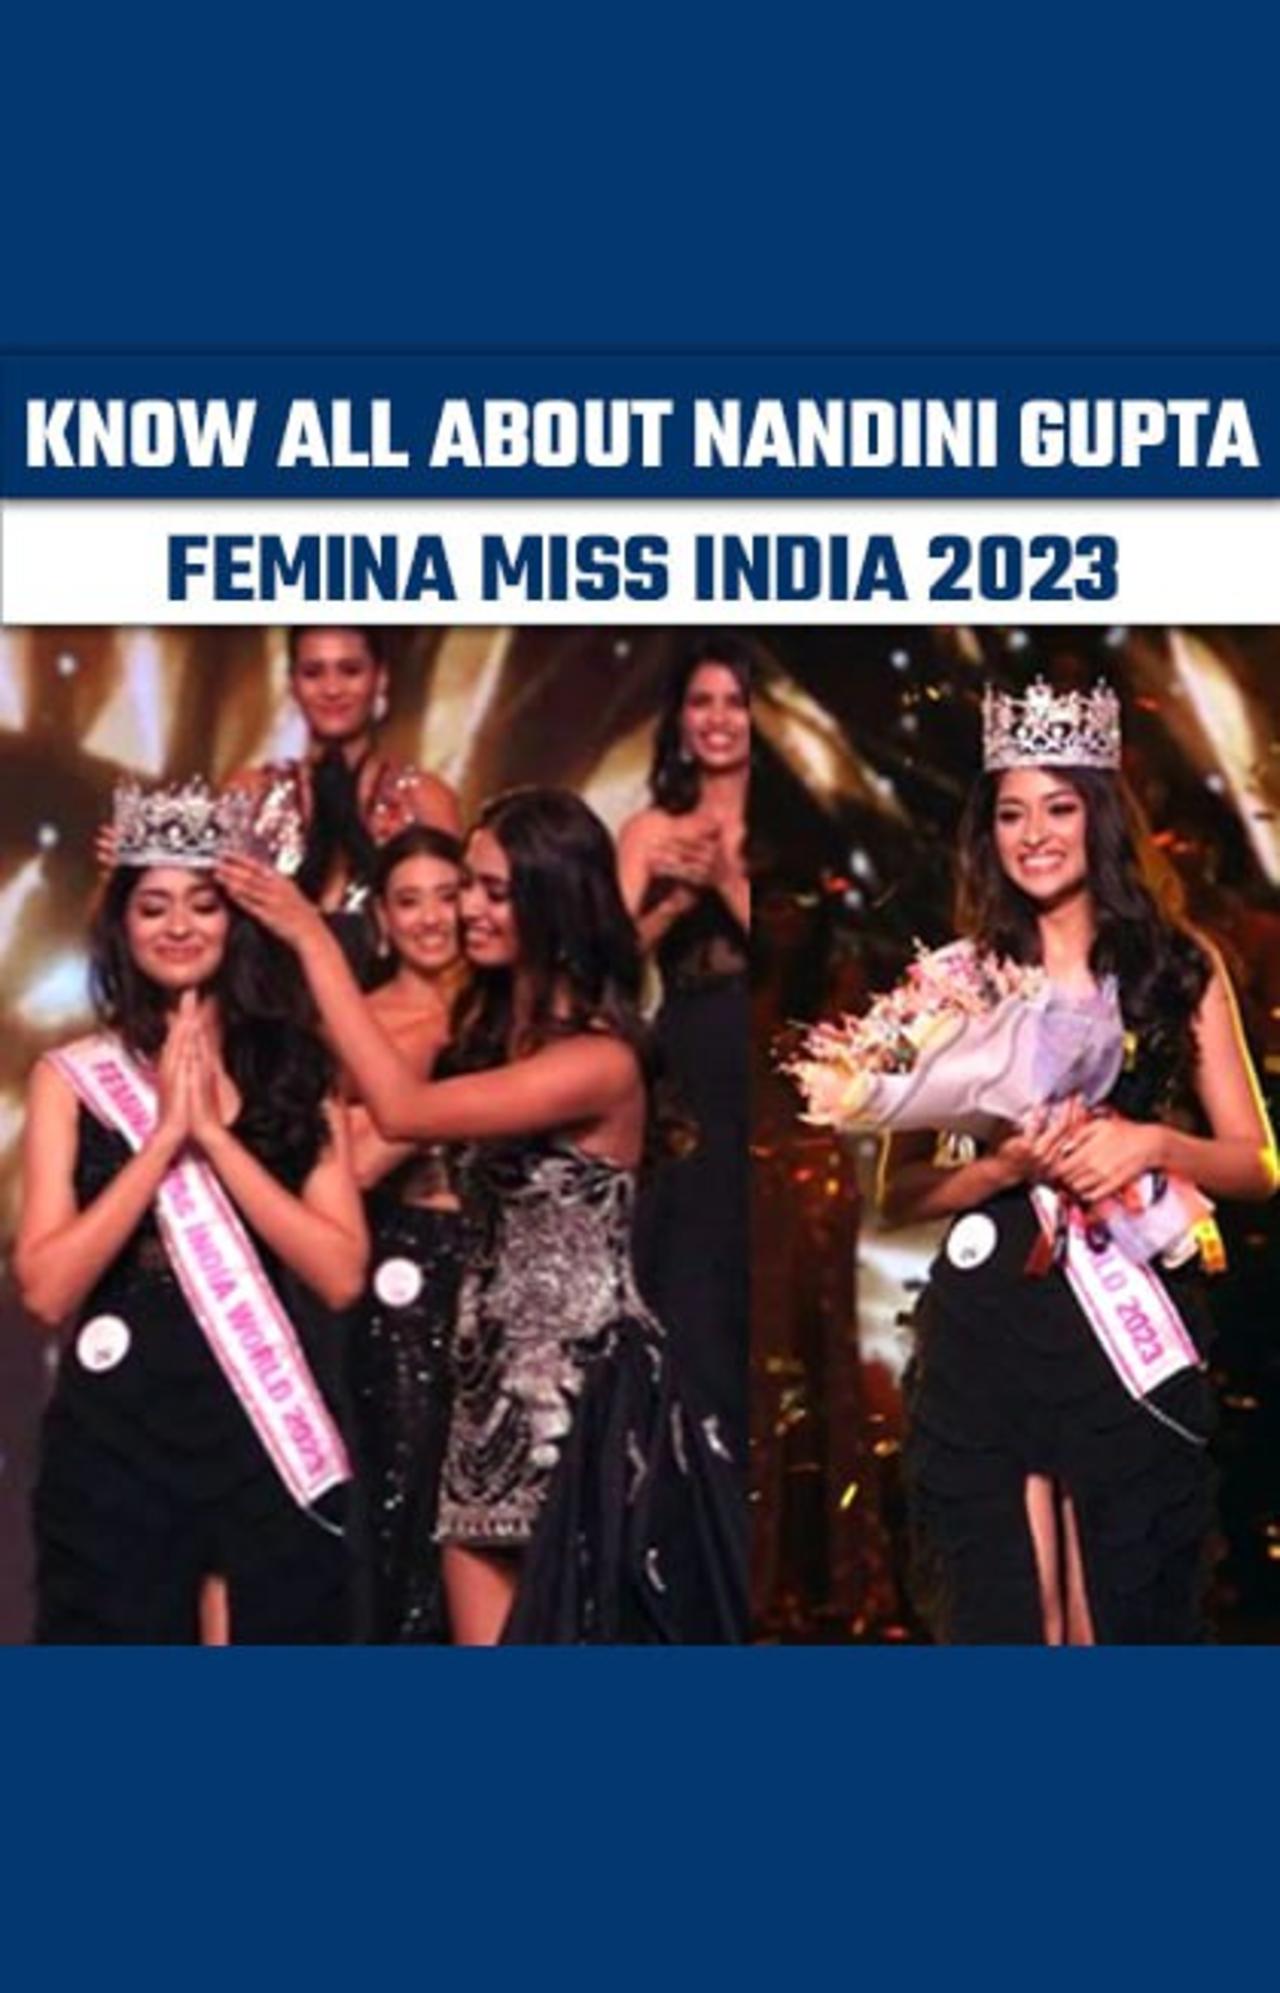 Nandini Gupta crowned Femina Miss India 2023, Know all about the new winner | Oneindia News